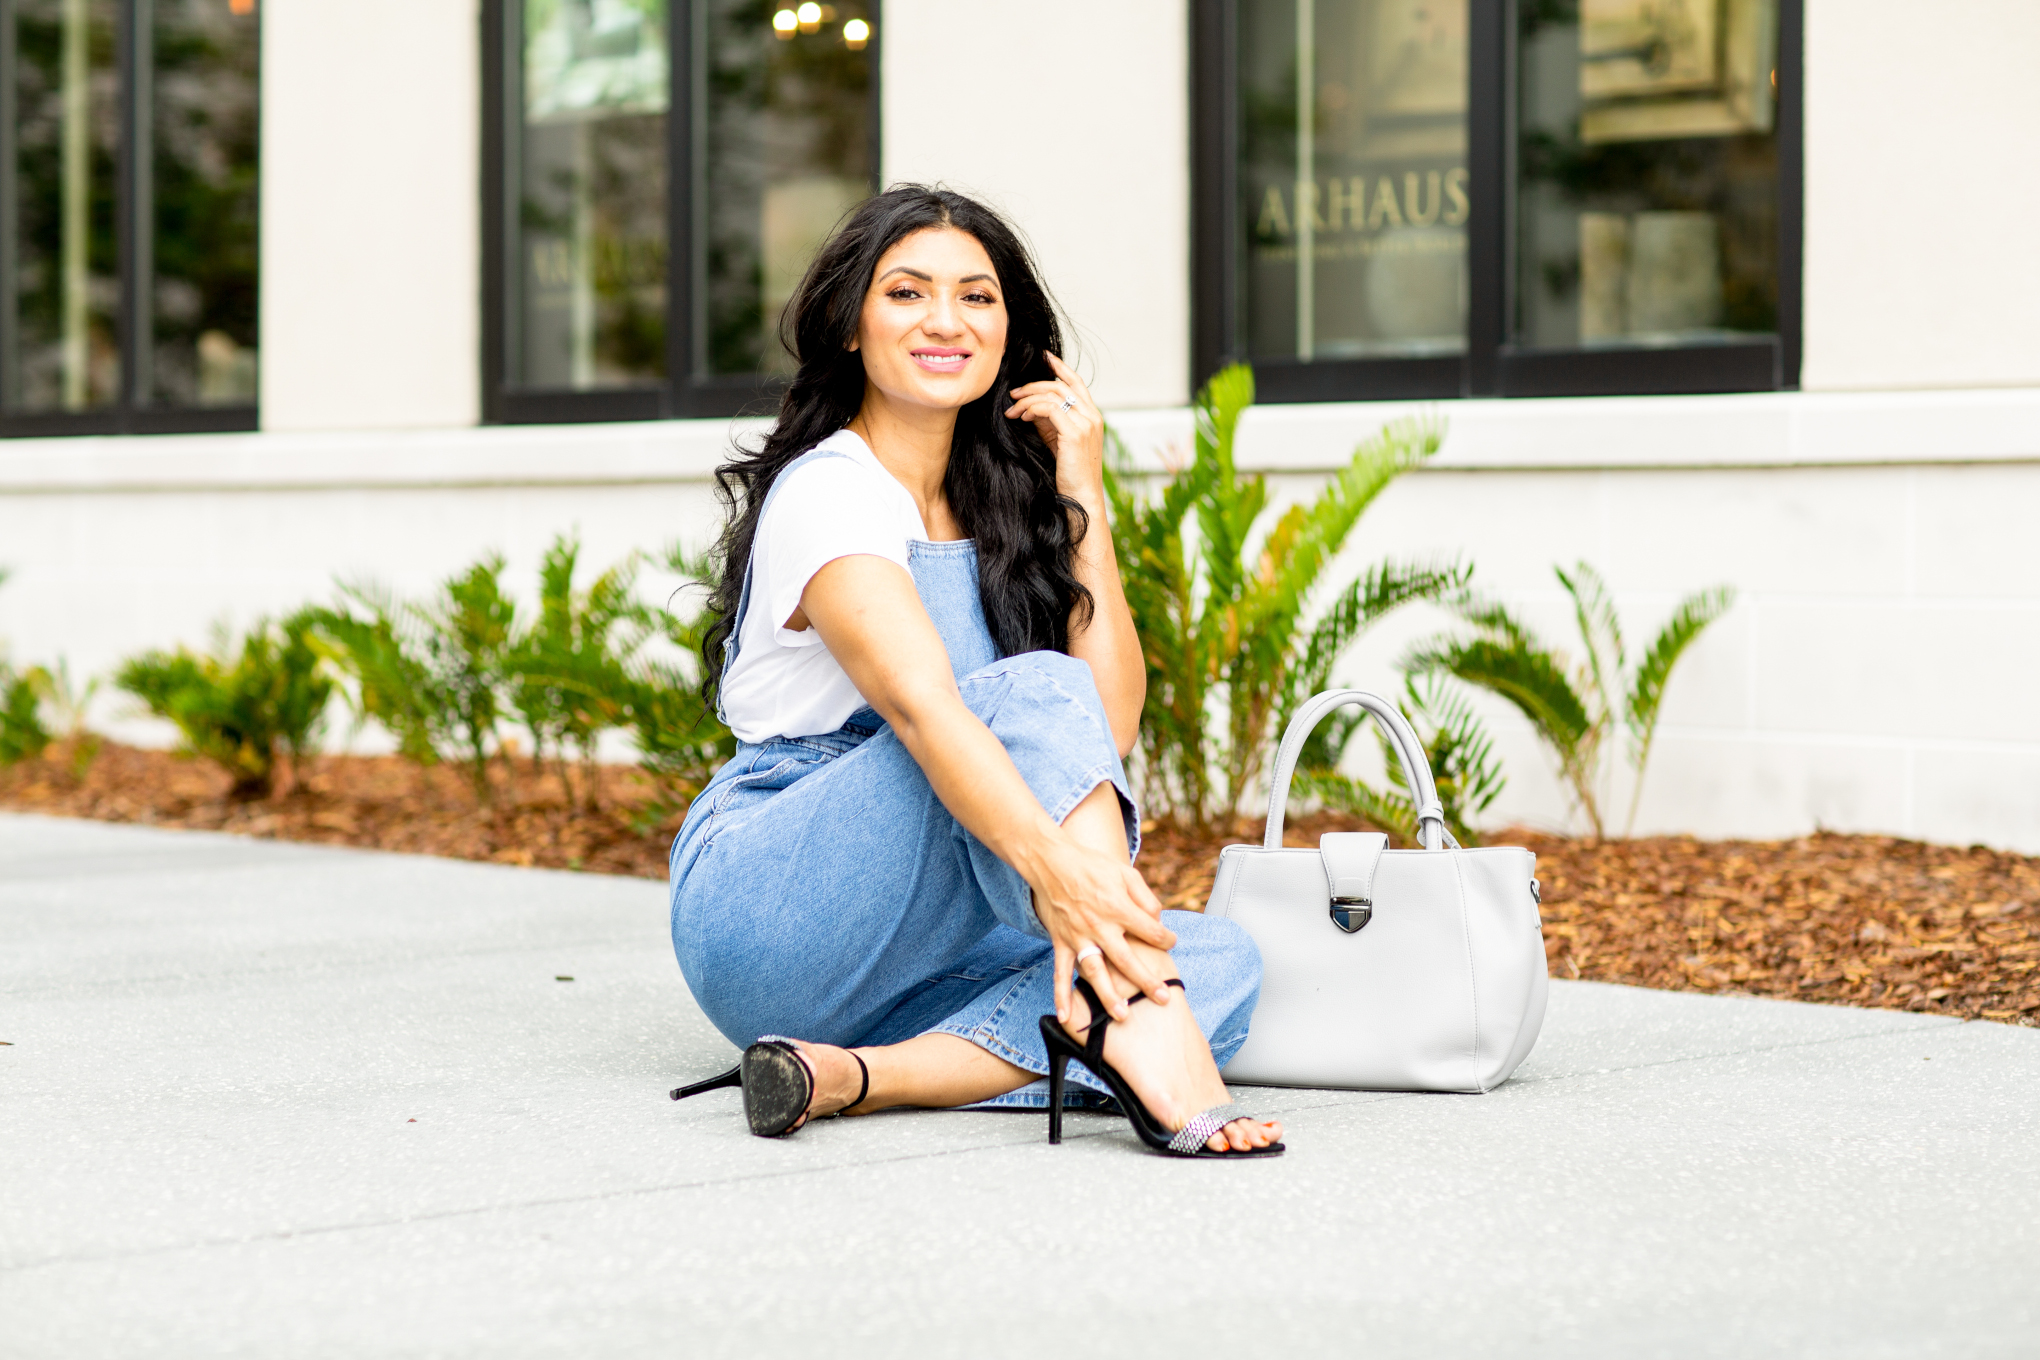 Overalls for summer? Trust me you NEED to try them. Orange County Blogger Debbie Savage is sharing why you need overalls for summer and how to style them here!